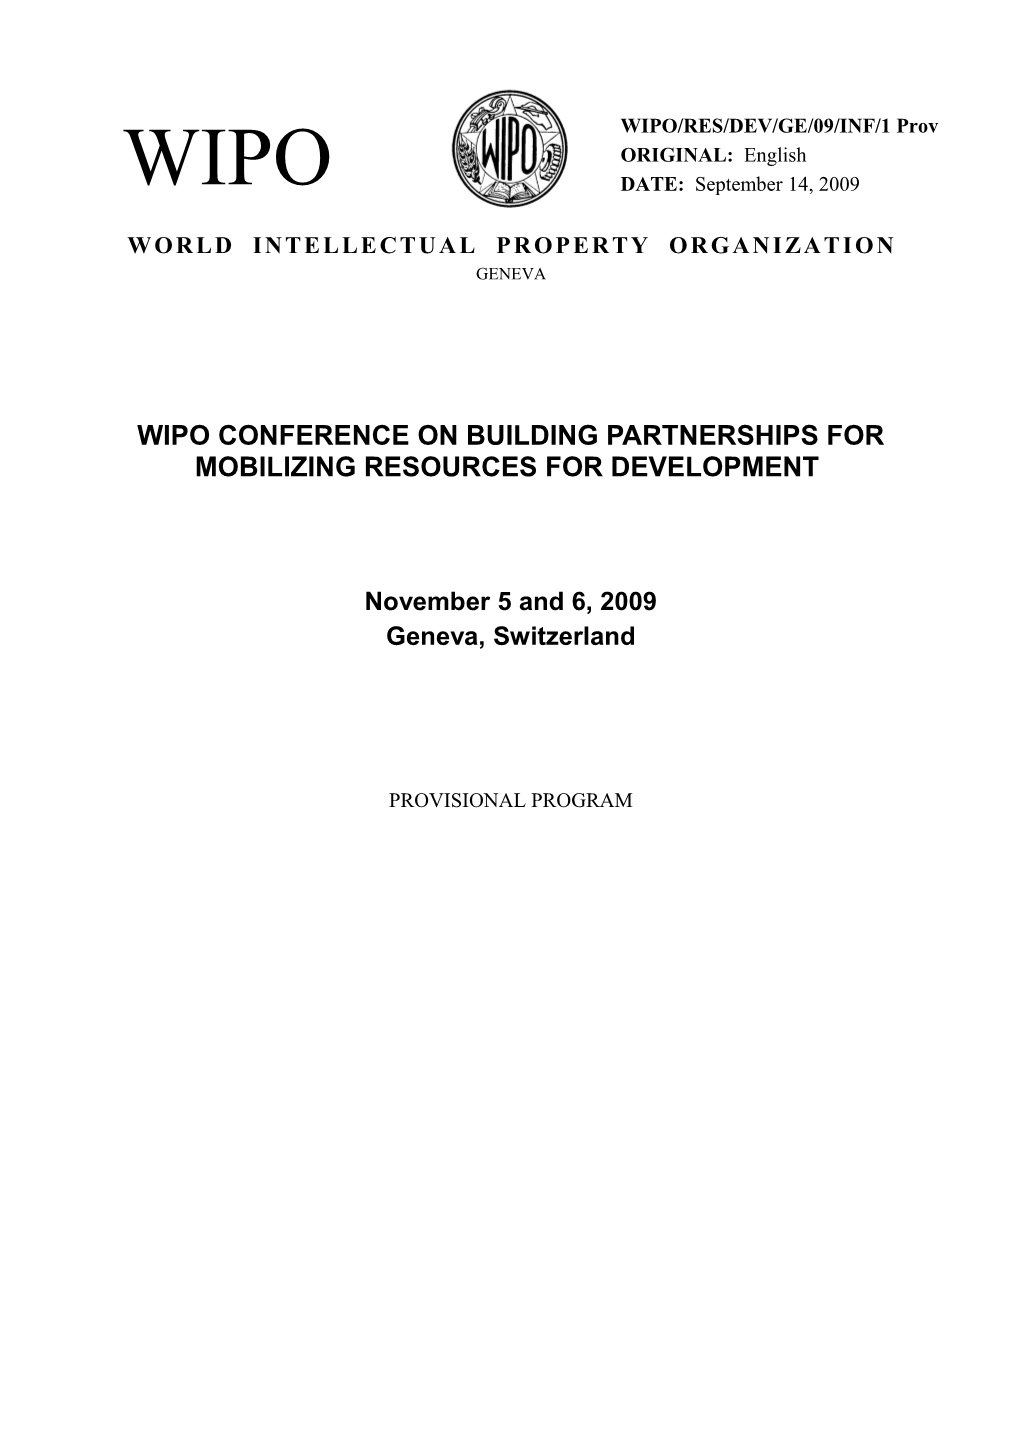 Wipo Conference on Building Partnerships for Mobilizing Resources for Development